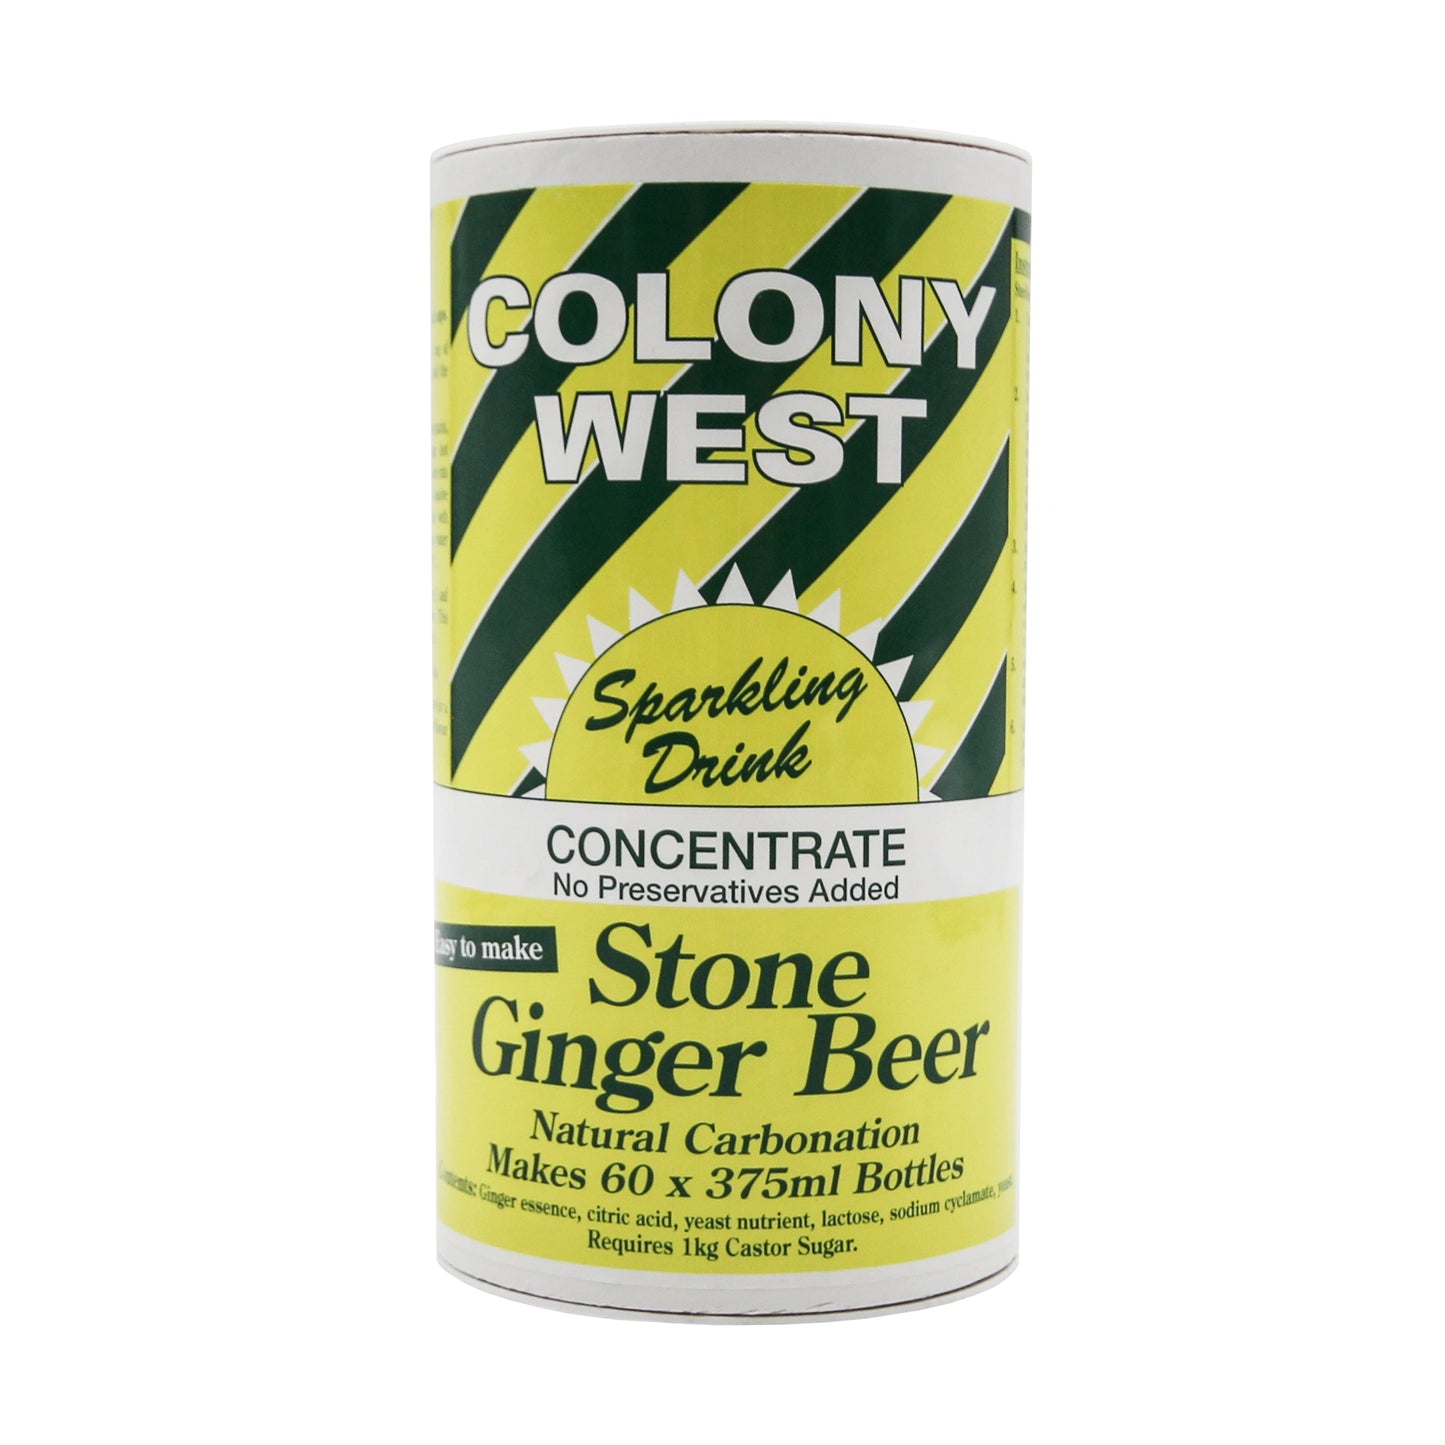 tin of colony west ginger beer - makes 60 375ml bottles.